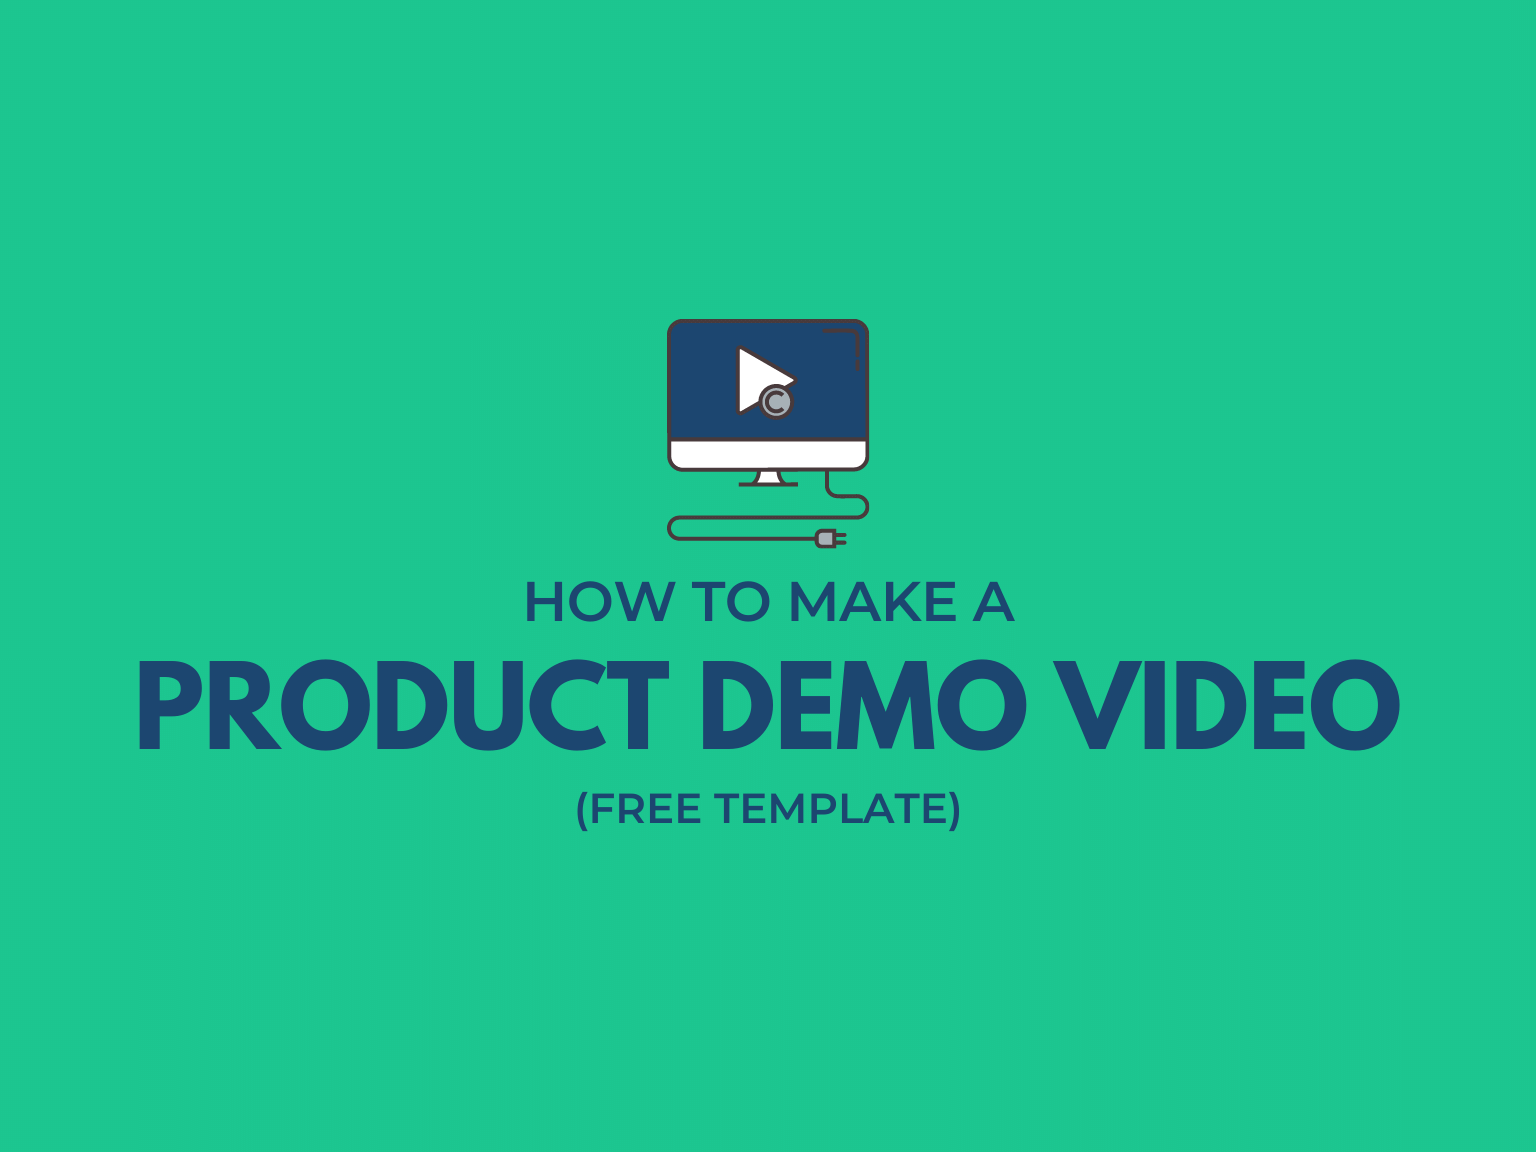 how to make a product demo video header image